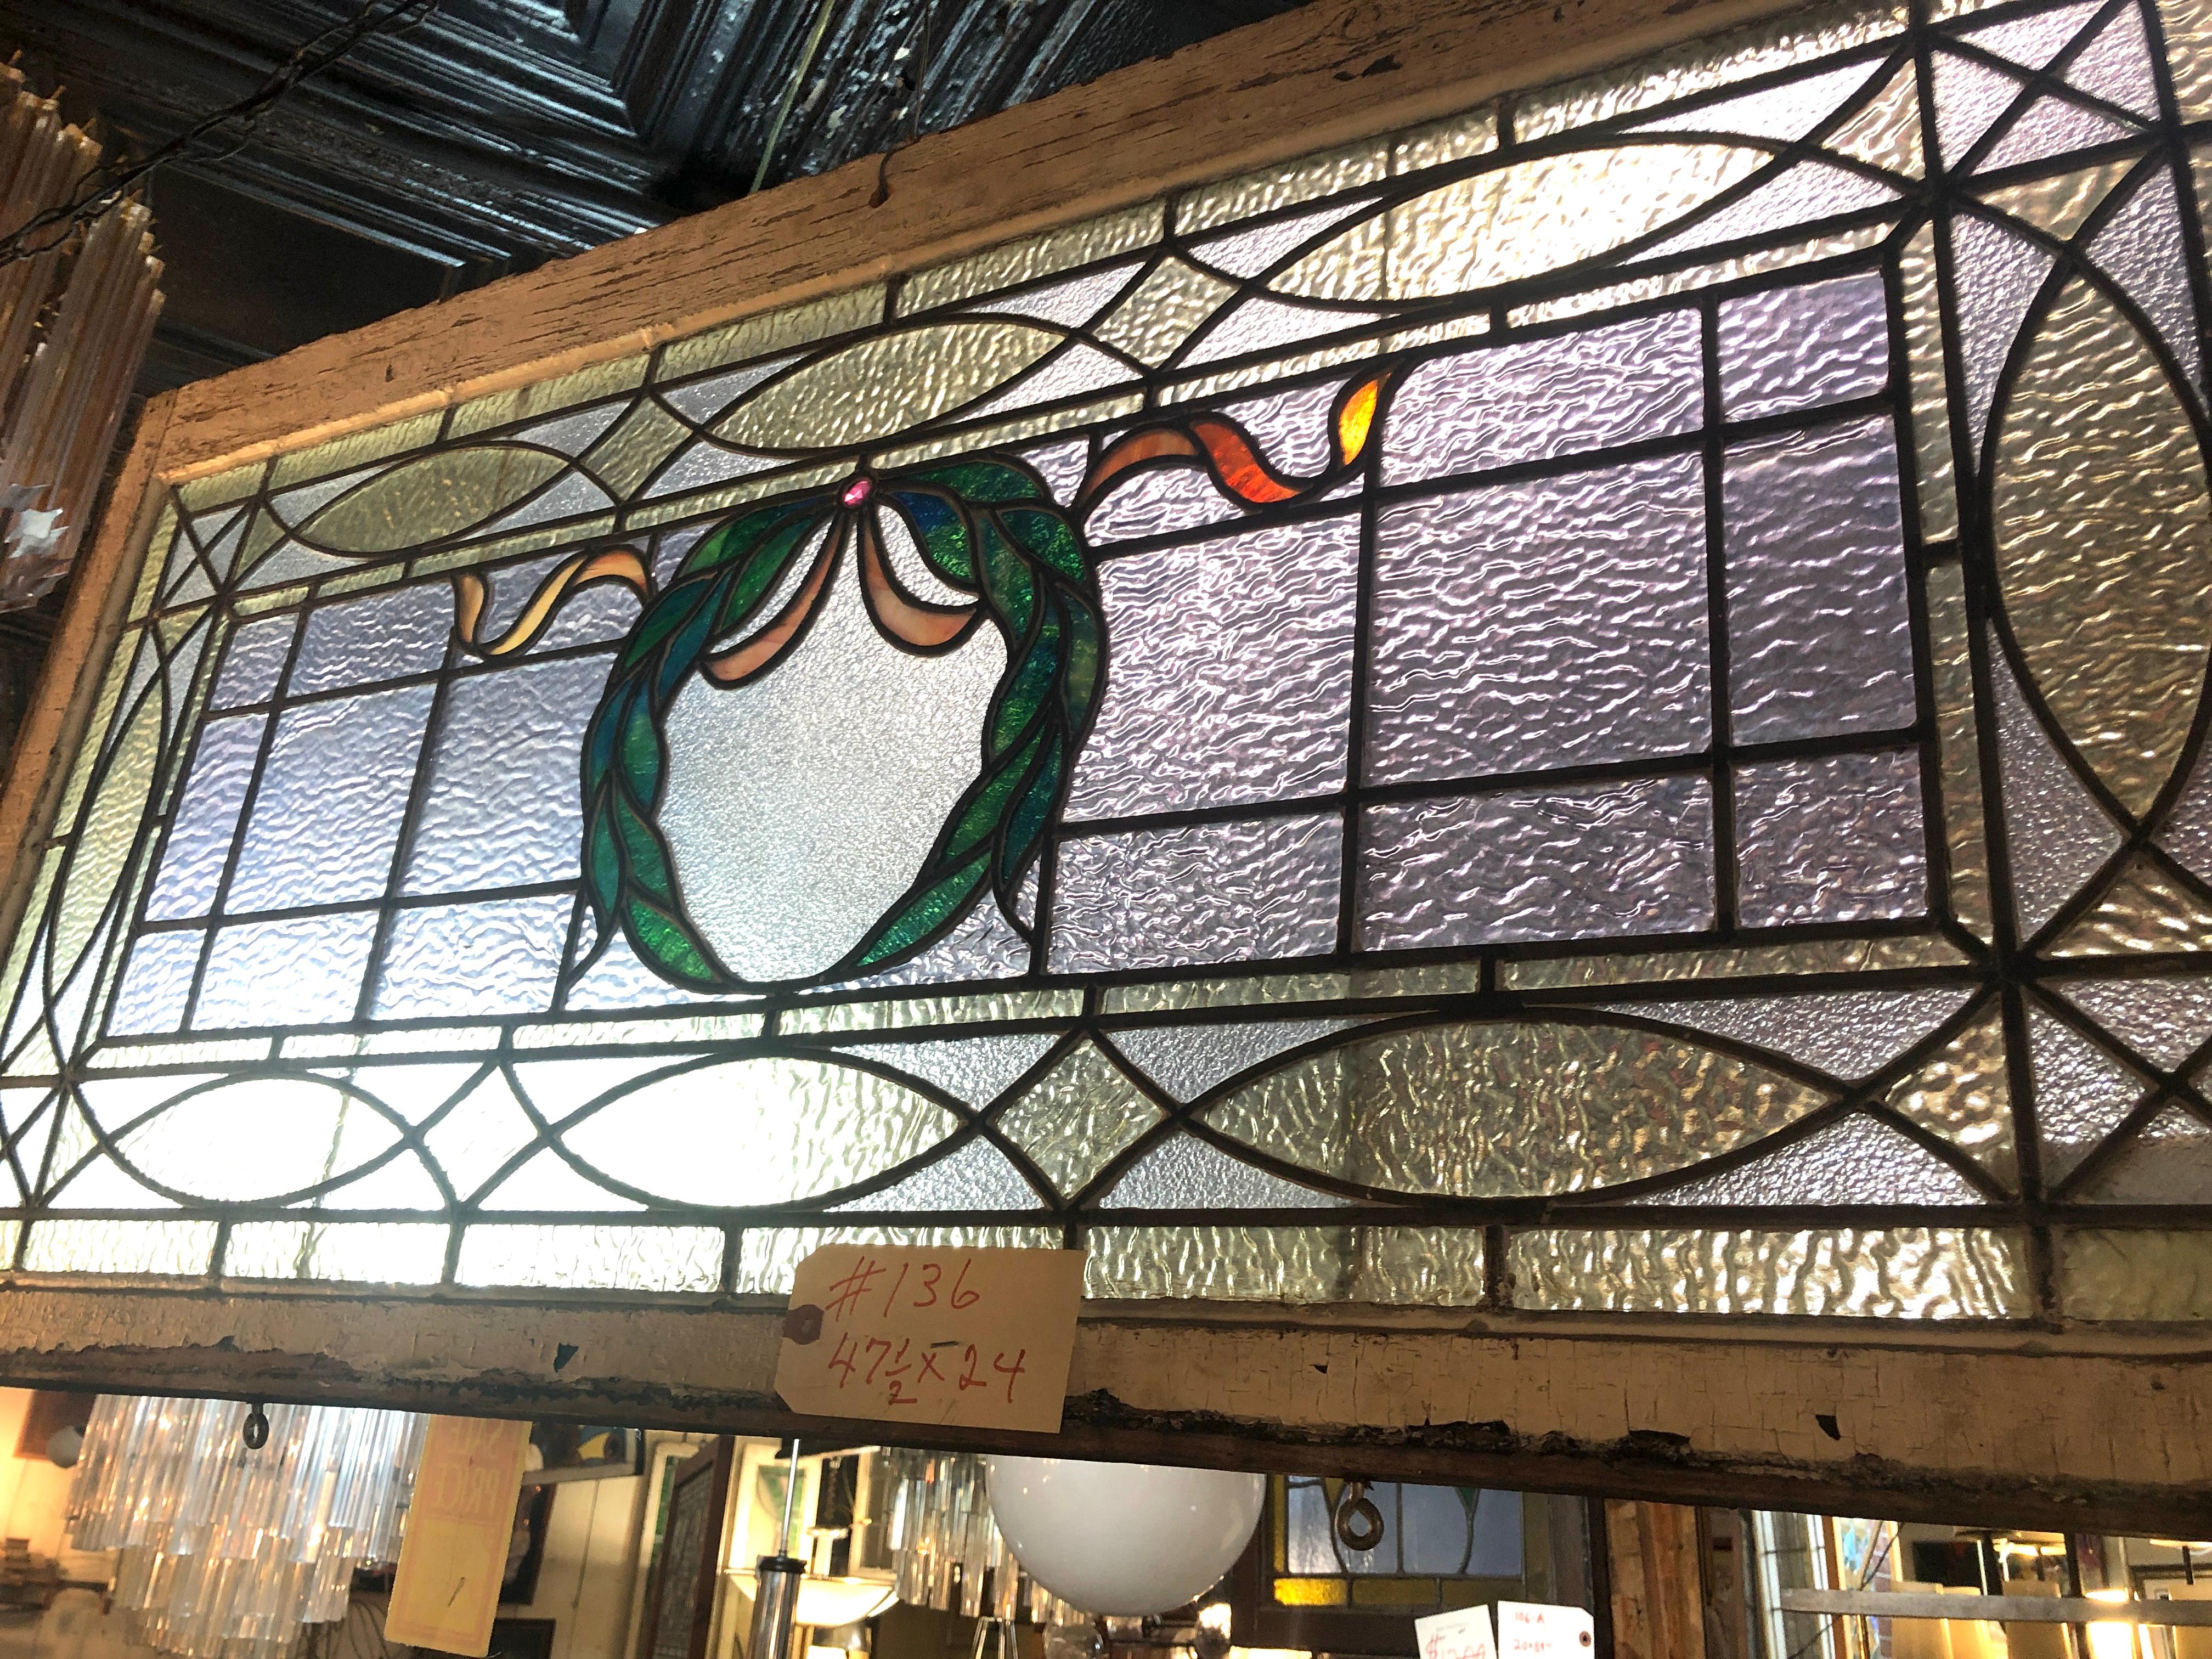 American made stained glass window with wreath design. Wonderful coloring and led work.
Currently housed in a temporary wooden frame - the overall dimensions are for the stained glass and the frame.
Located in NY